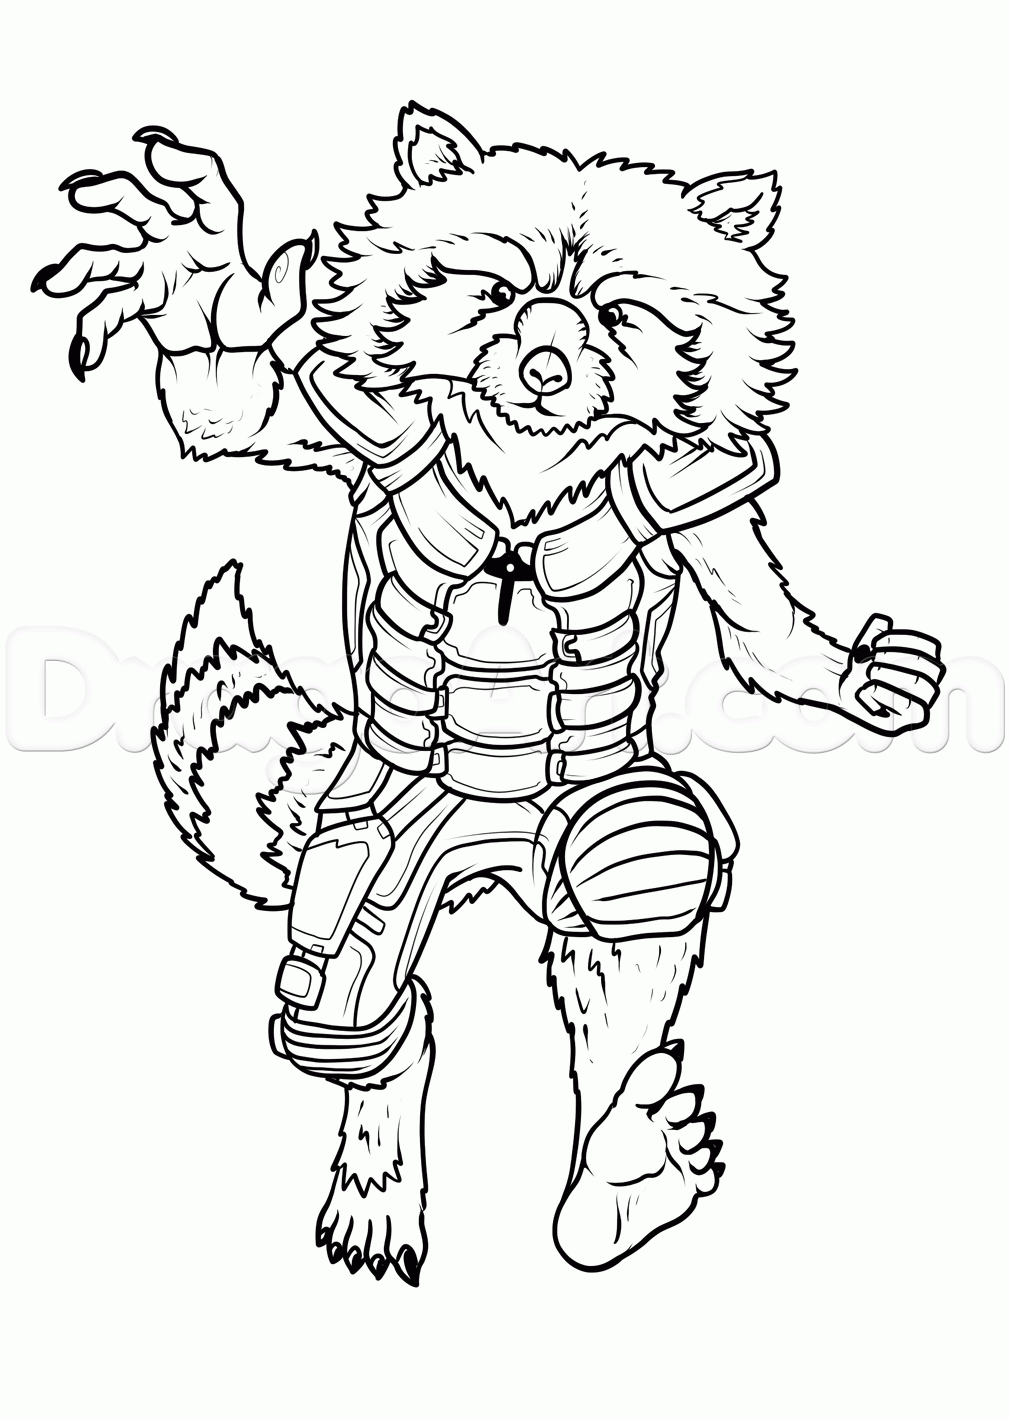 Armor Rocket Raccoon Coloring Page - Free Printable Coloring Pages for Kids